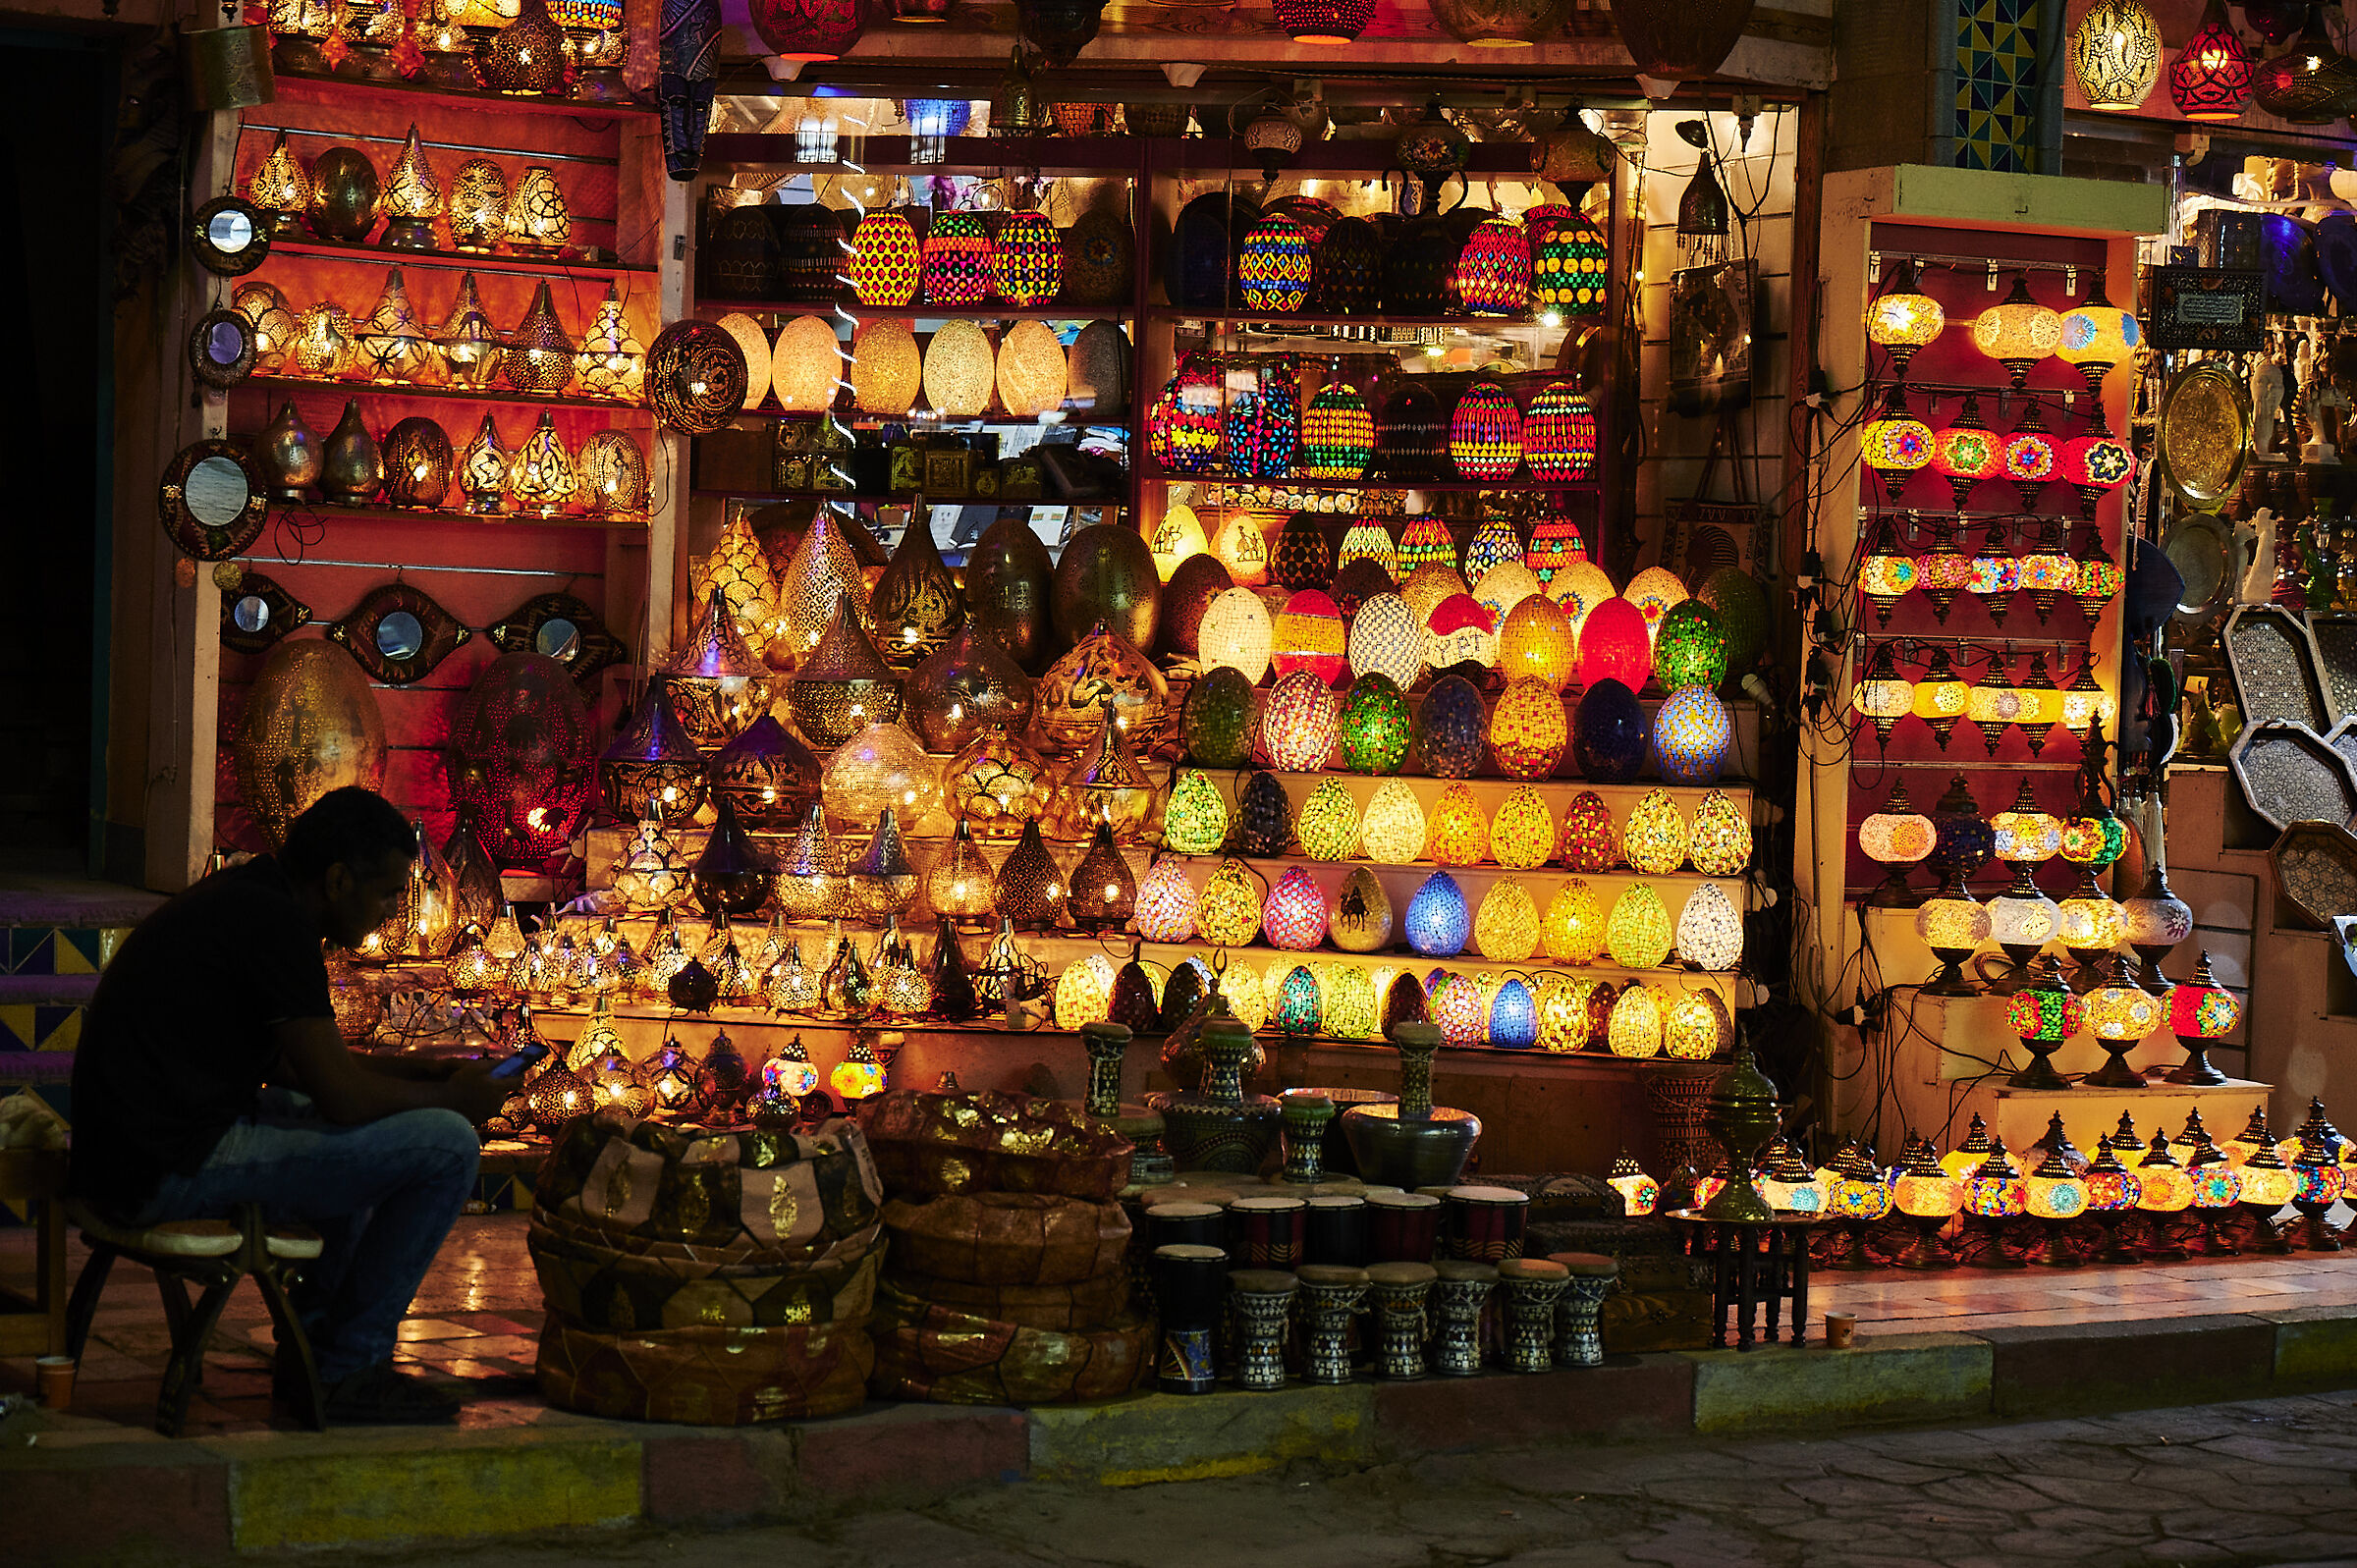 Lights in the market...